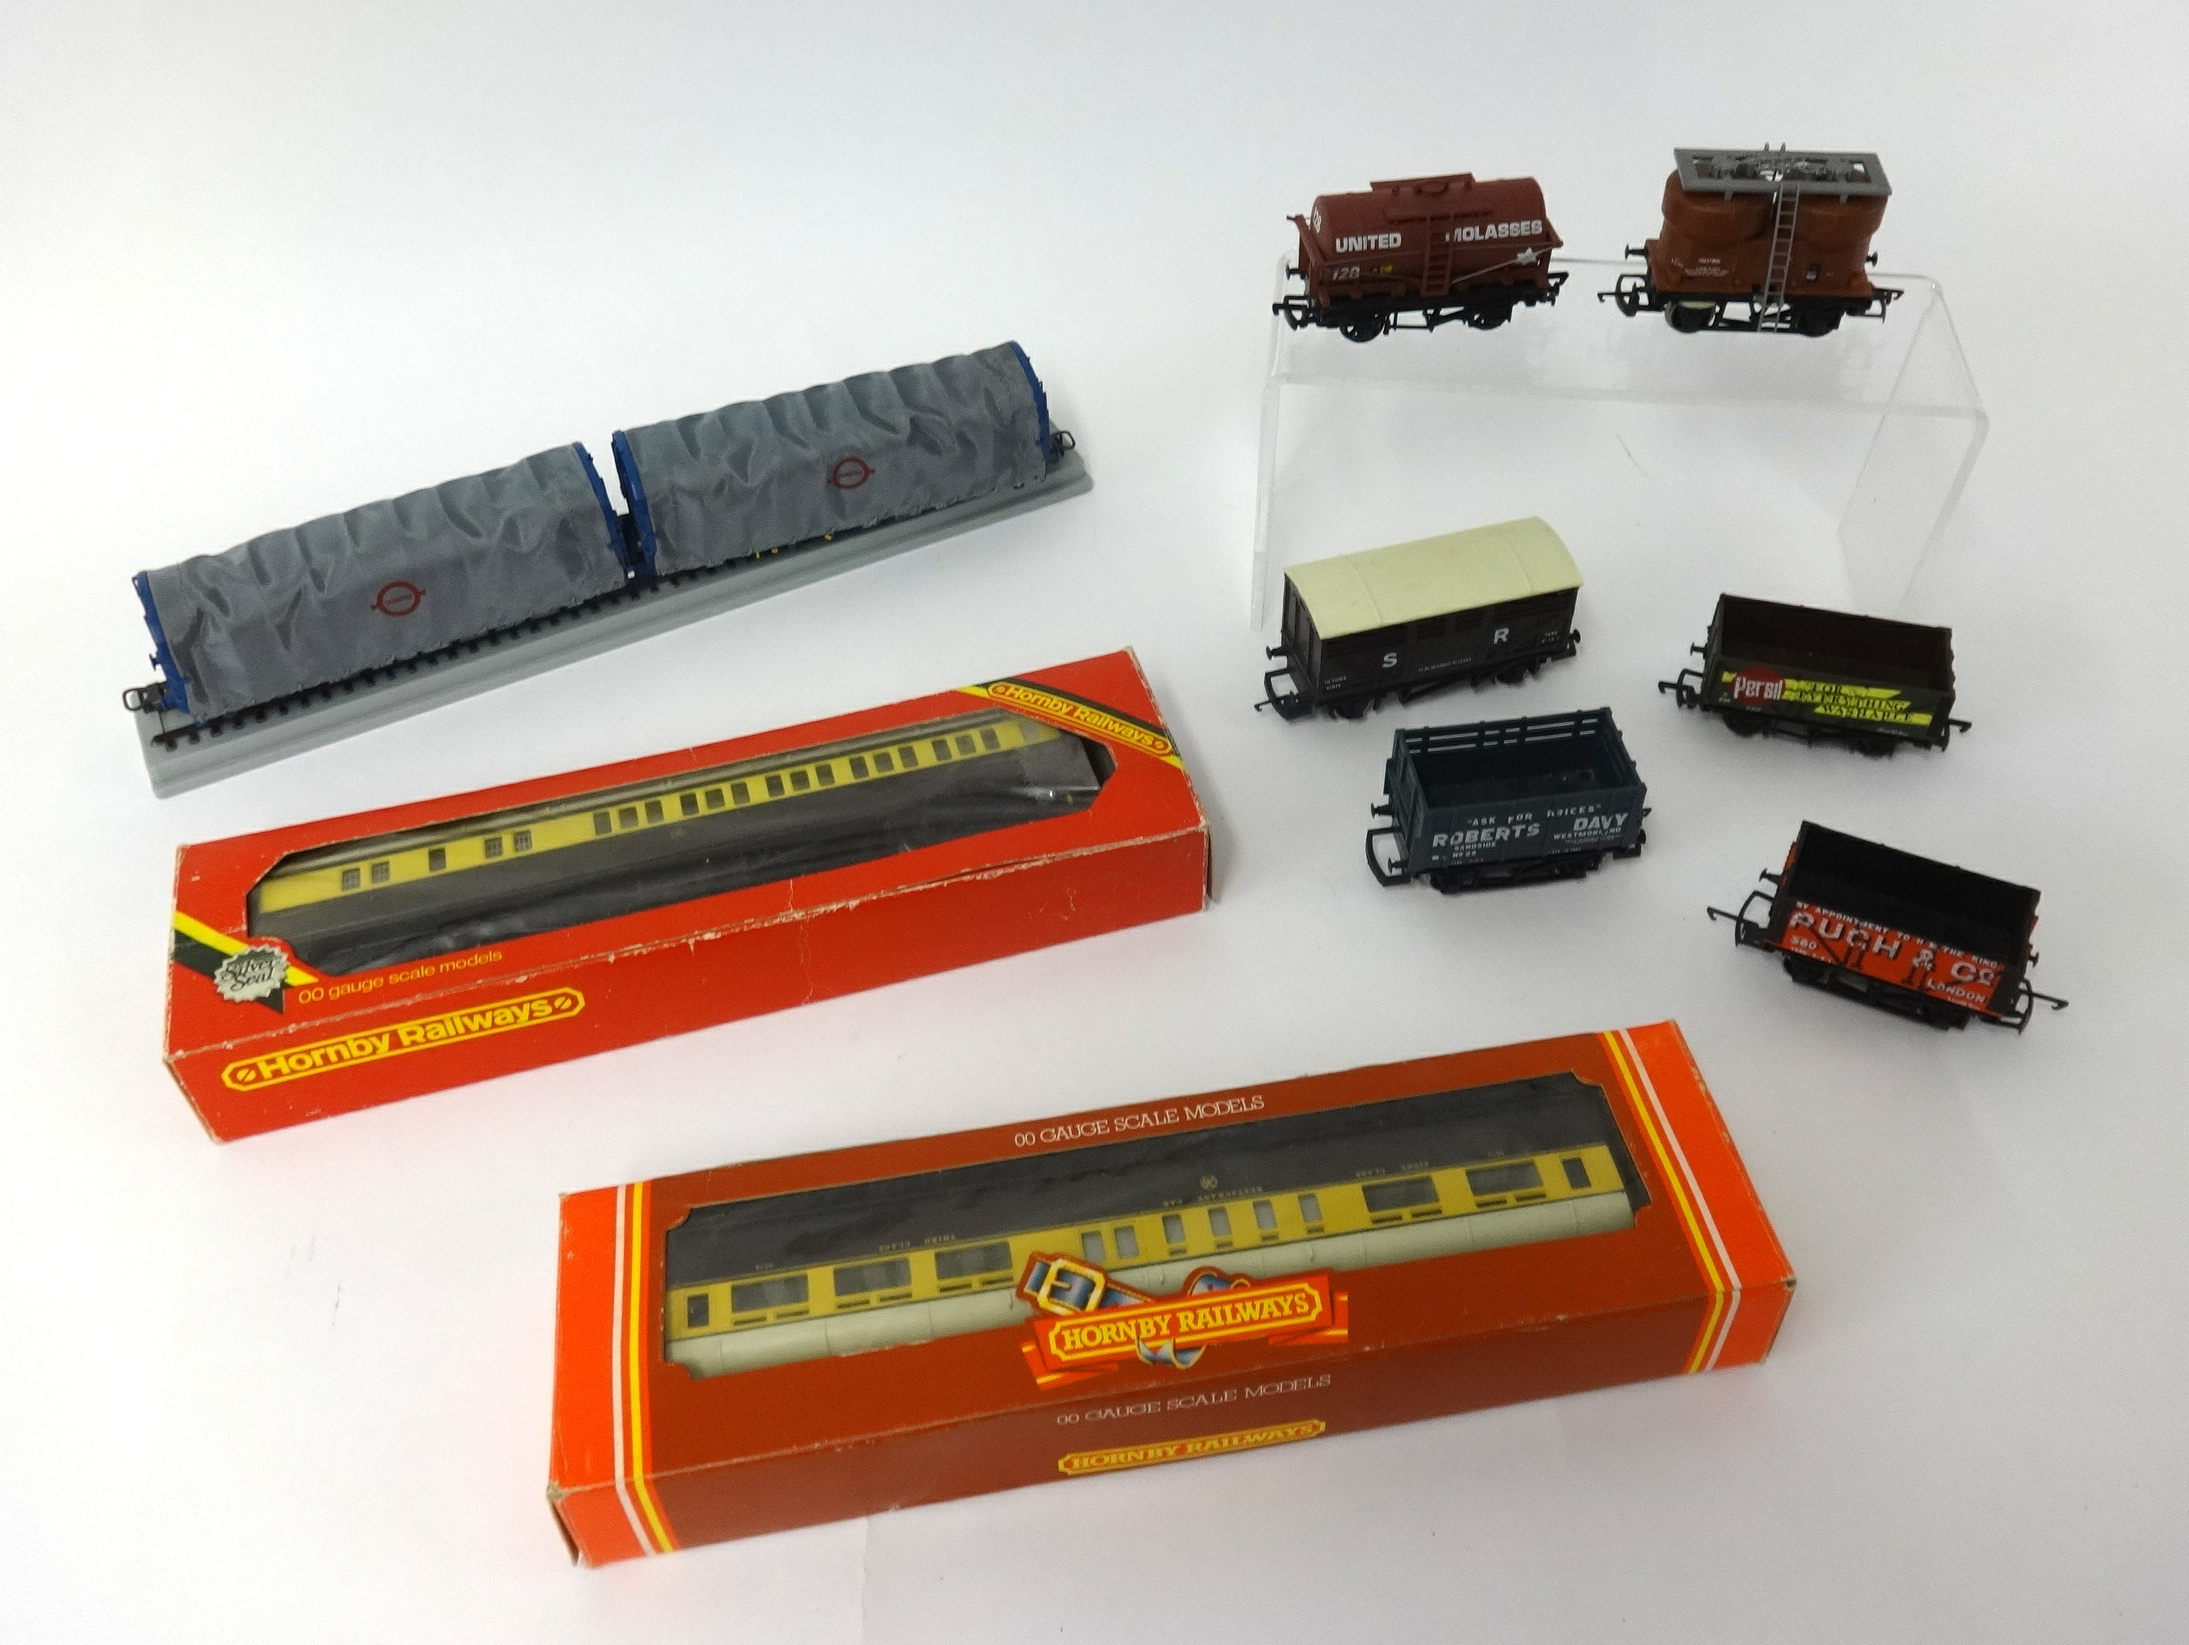 Various Hornby 00 gauge model railway, coaches and wagons, boxed, also locomotive Electrotren.